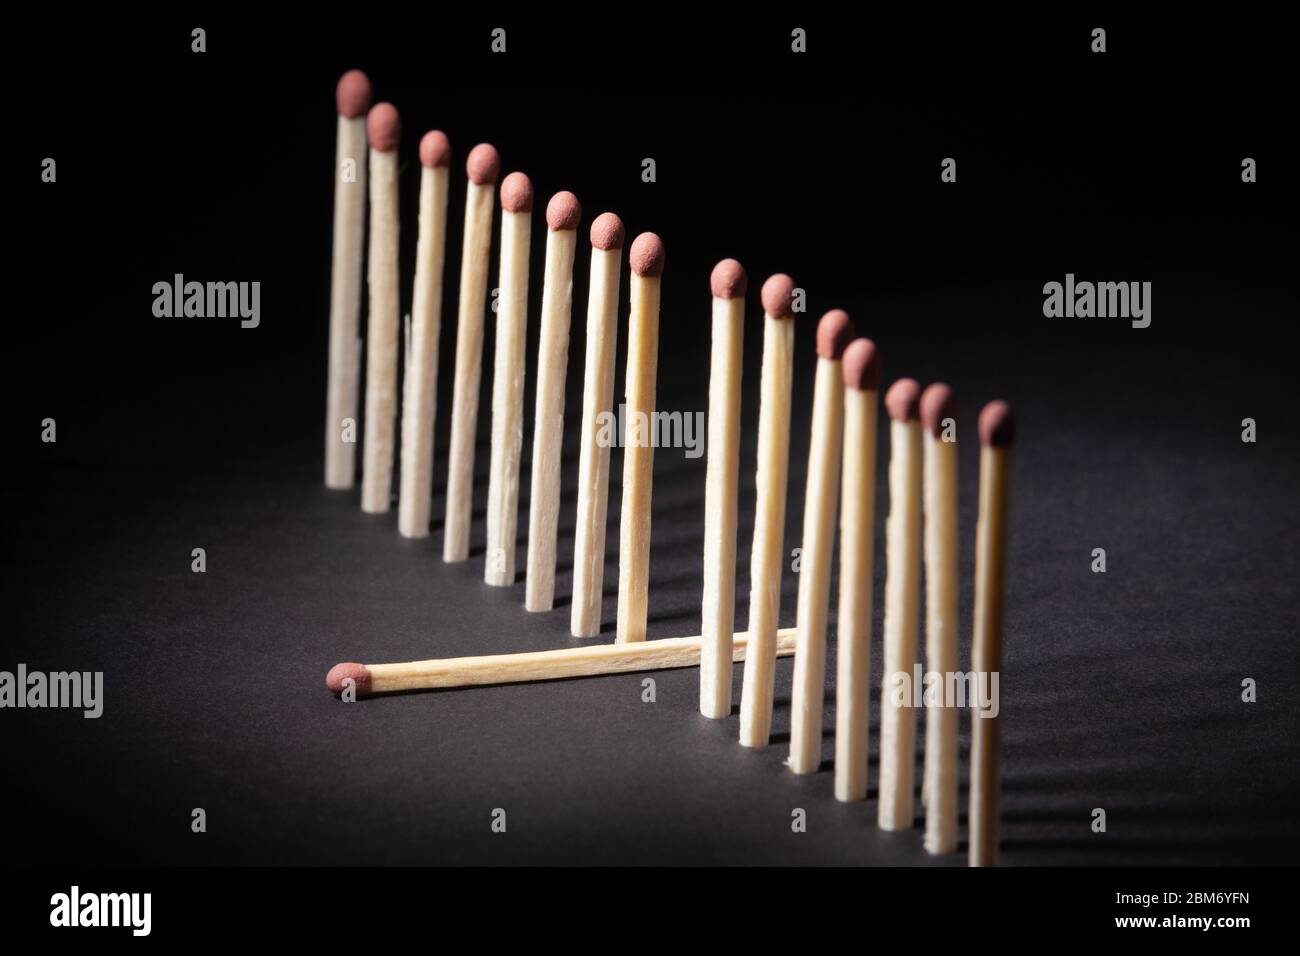 A row of upright unburnt matchsticks with one lying down out of the line Stock Photo